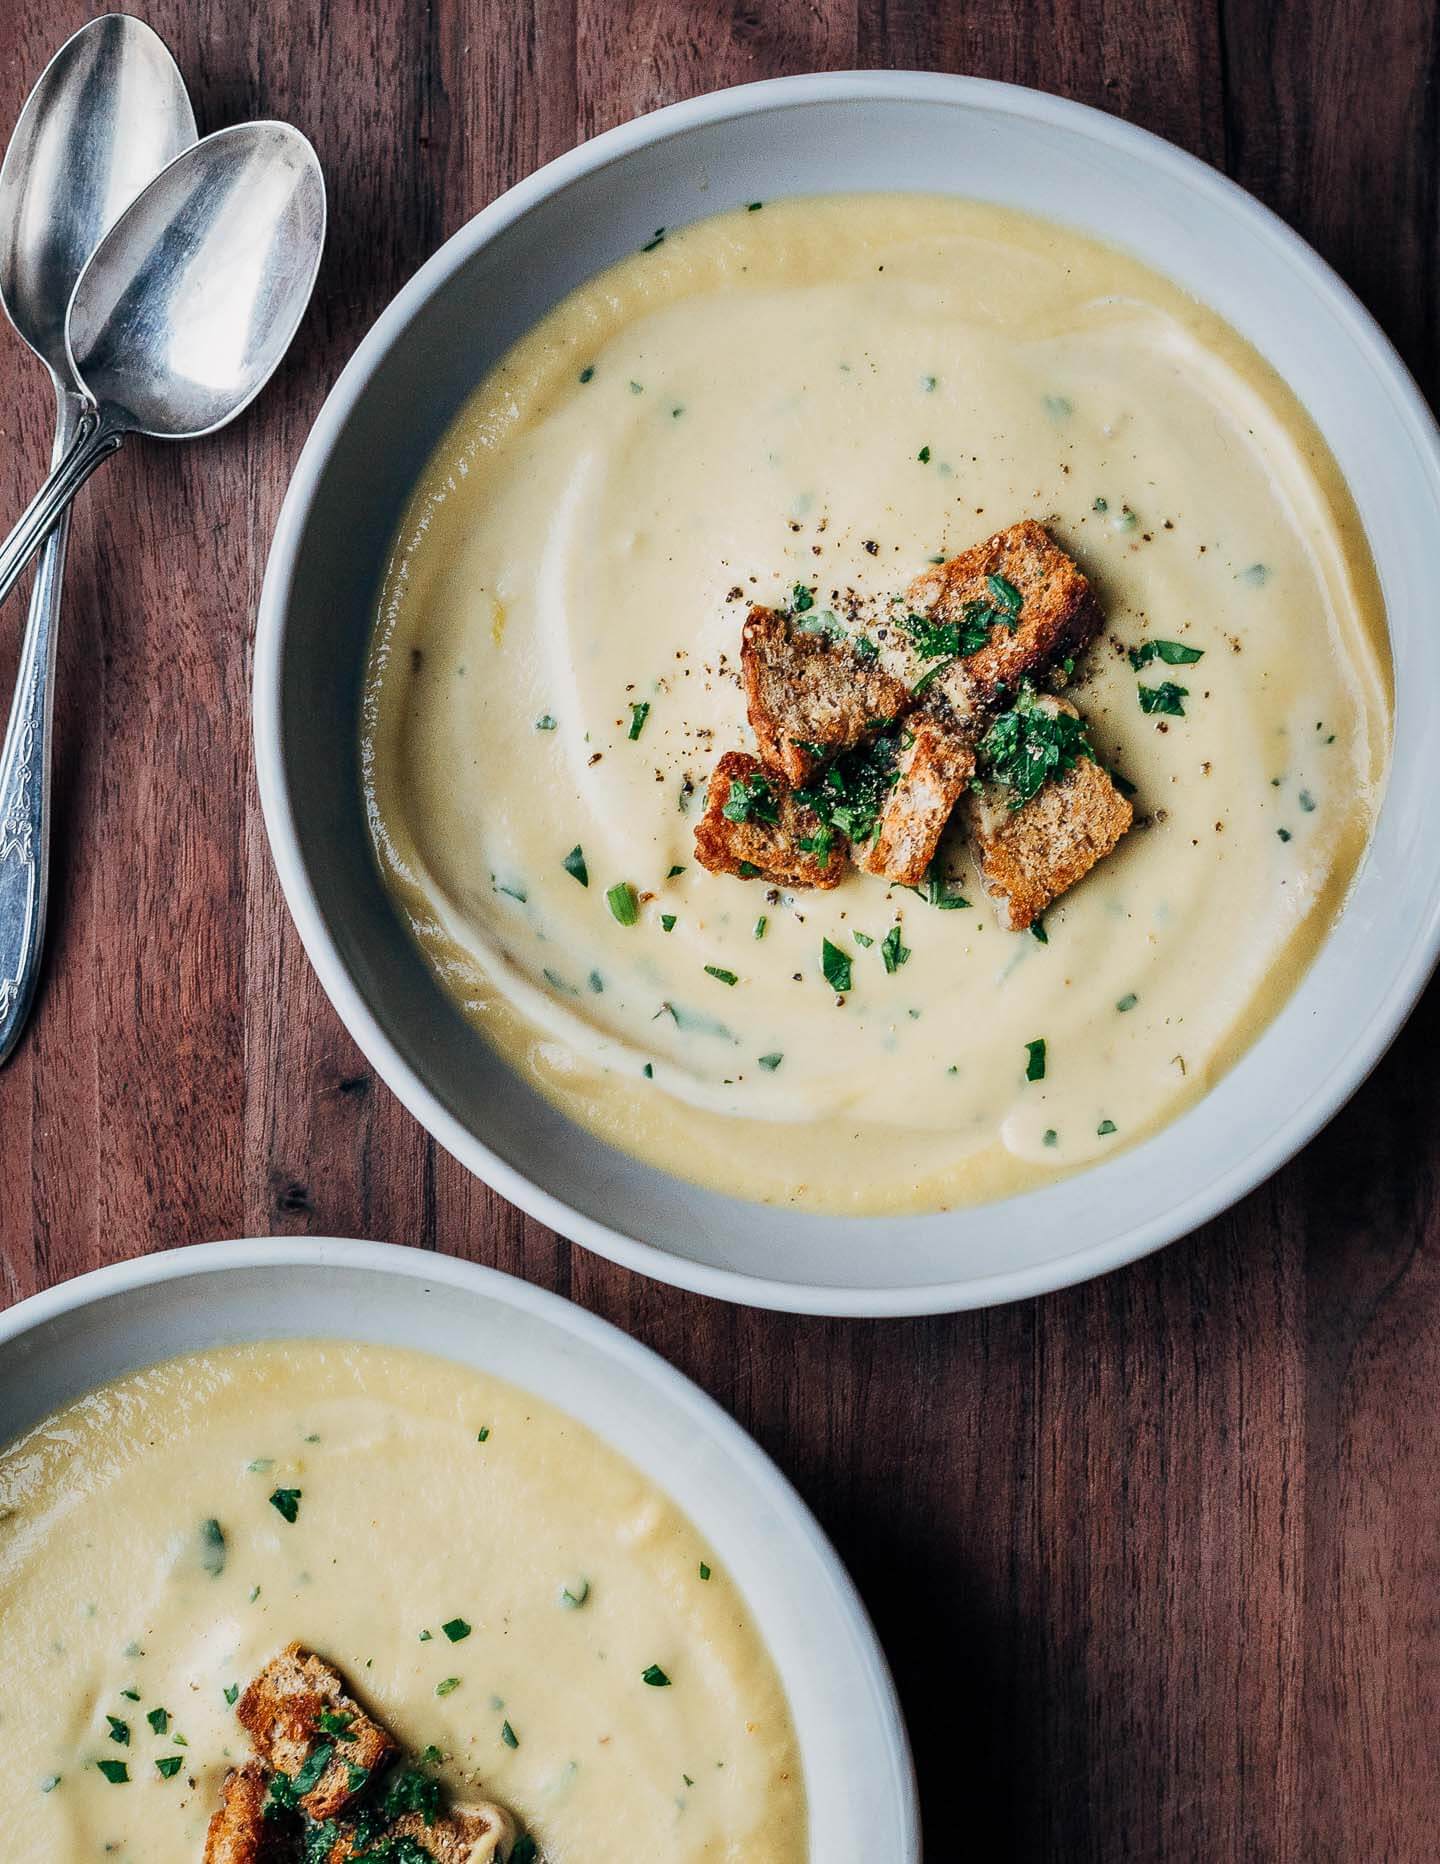 Two bowls of celery root soup topped with herbs and croutons.